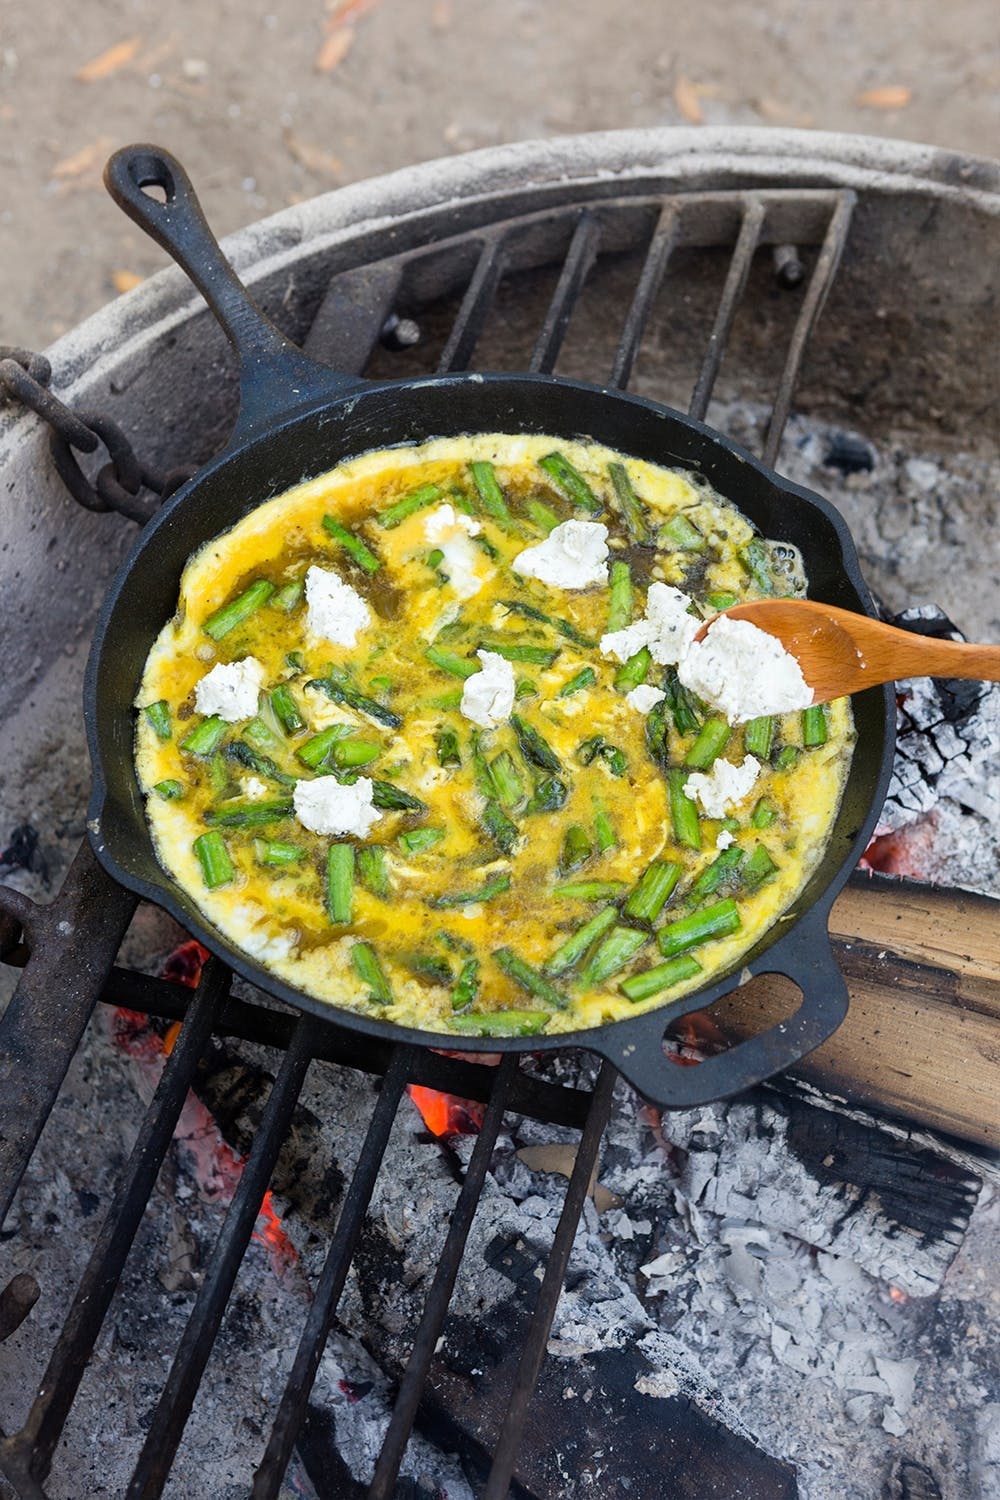 You can’t go wrong with a frittata, even when you're pressed for time. This recipe is so quick to whip up, you can have this dish ready before anyone says they’re hungry. Grill it over a fire pit, or simply cook it over your stovetop. (via Brit + Co.)